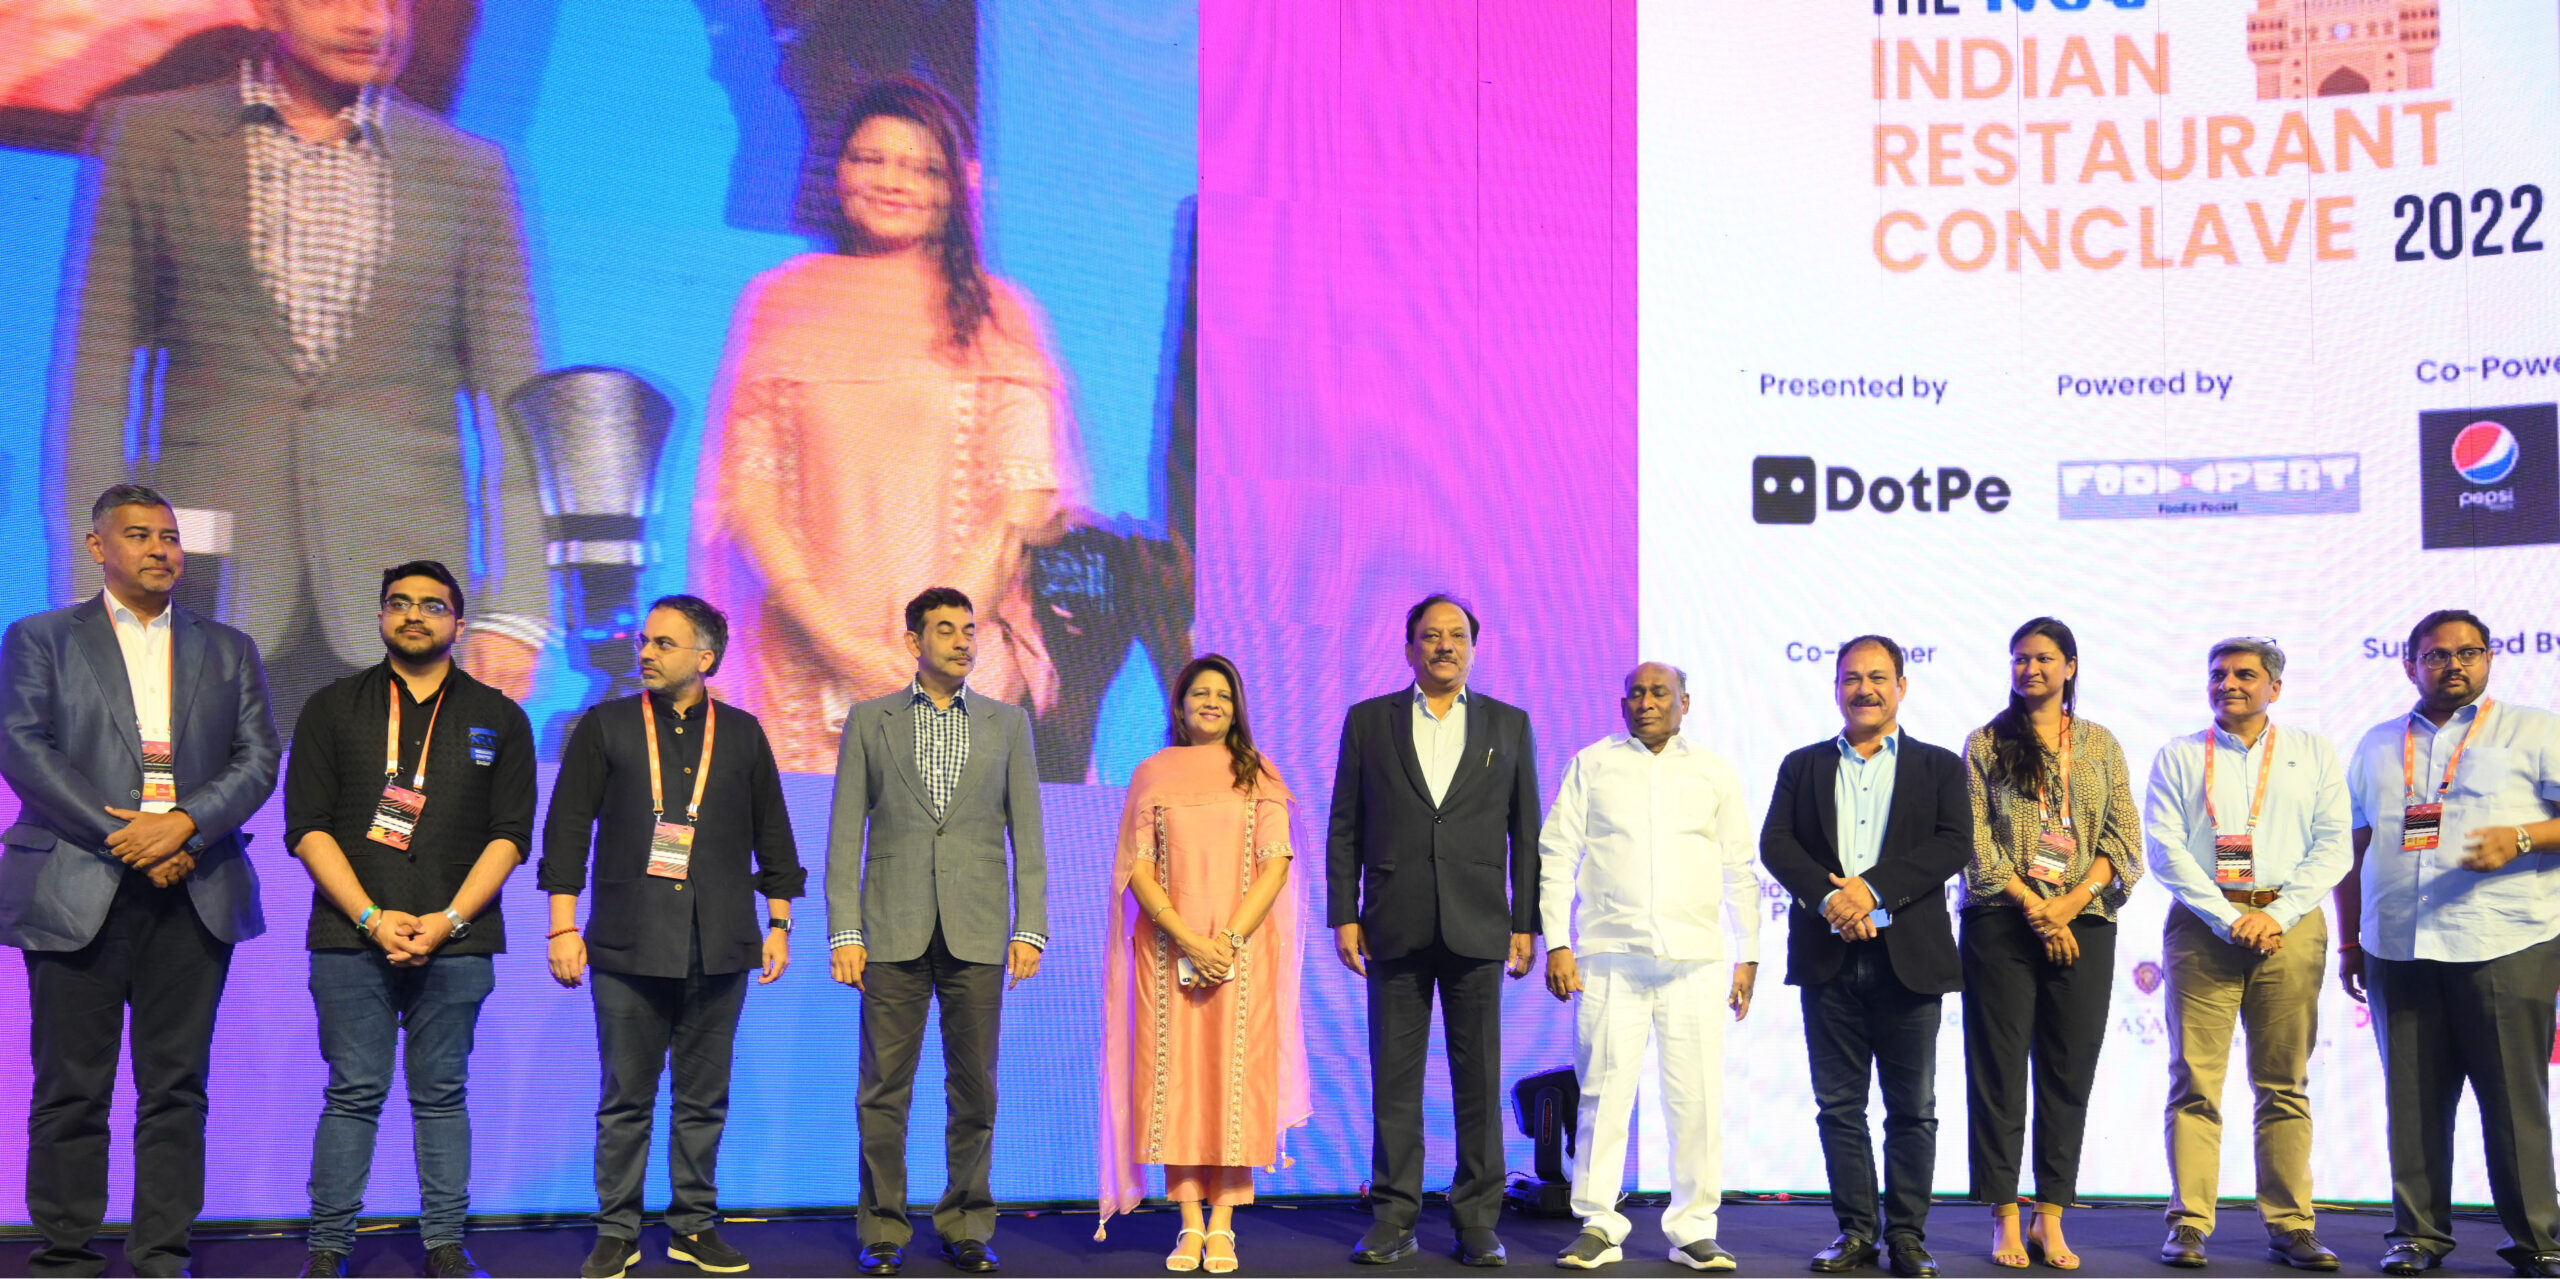 NRAI hosts India’s largest Restaurant Industry Conclave in Hyderabad – Telangana